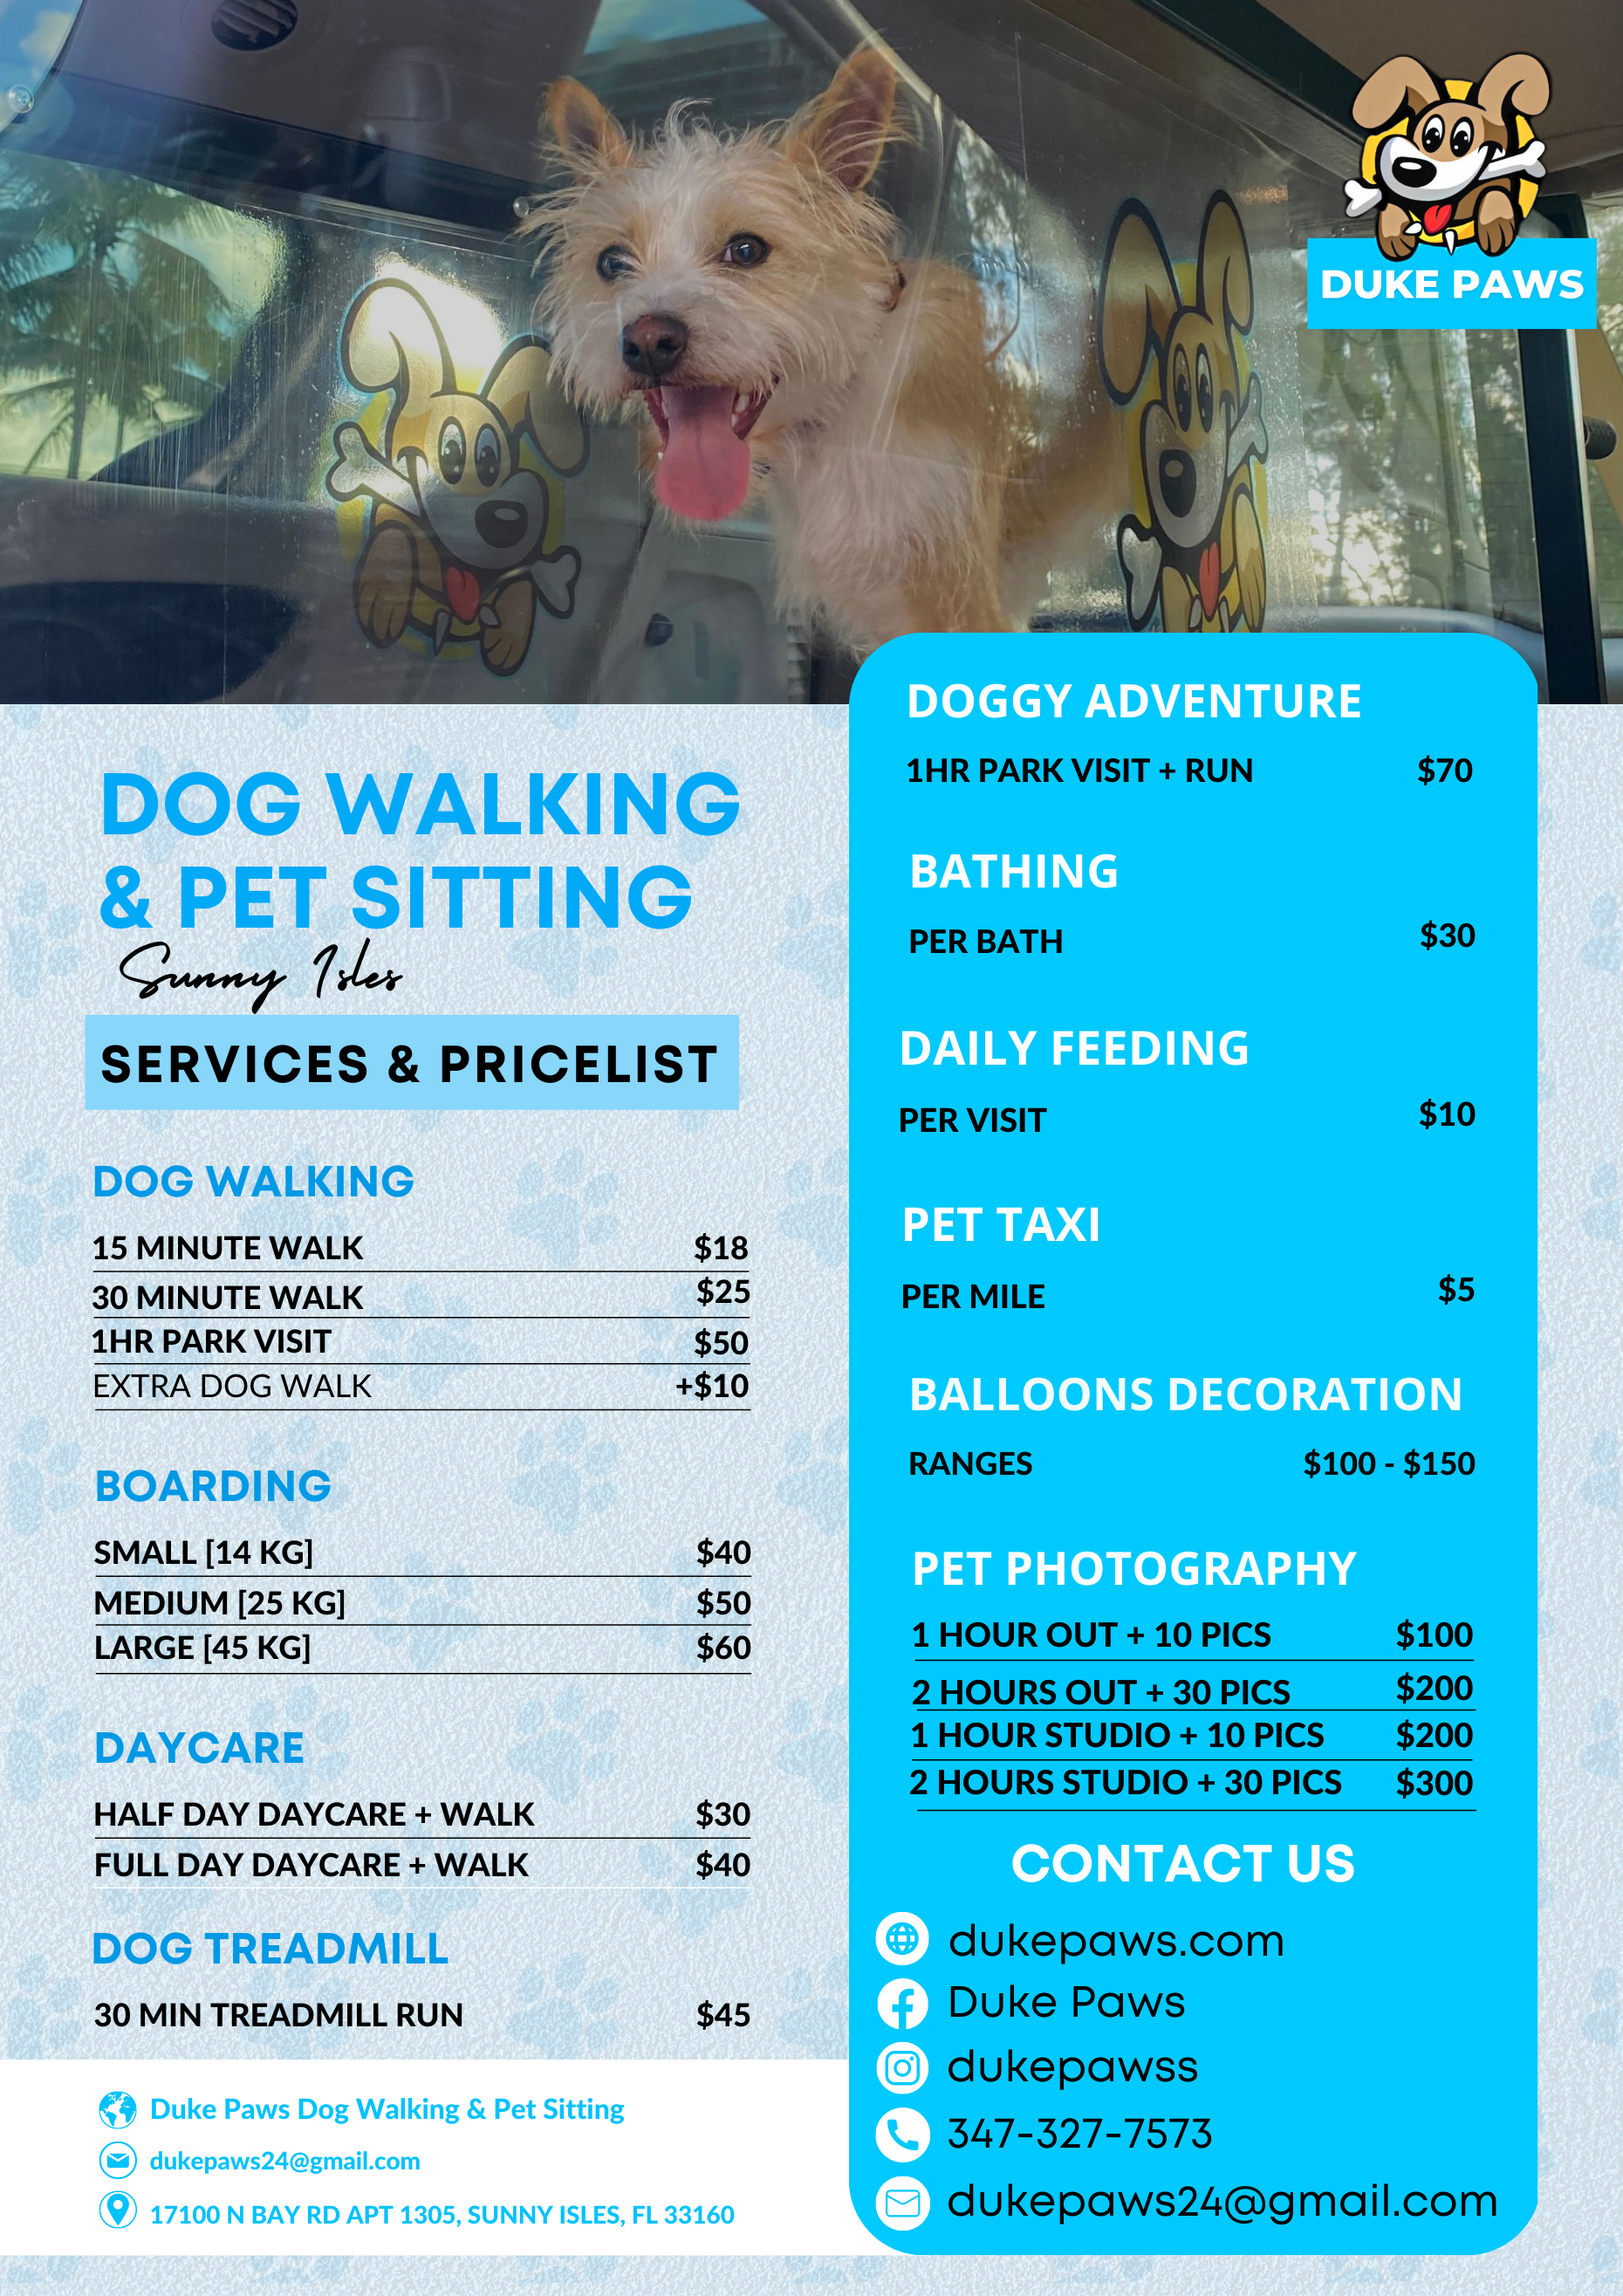 How much does dog walking cost?